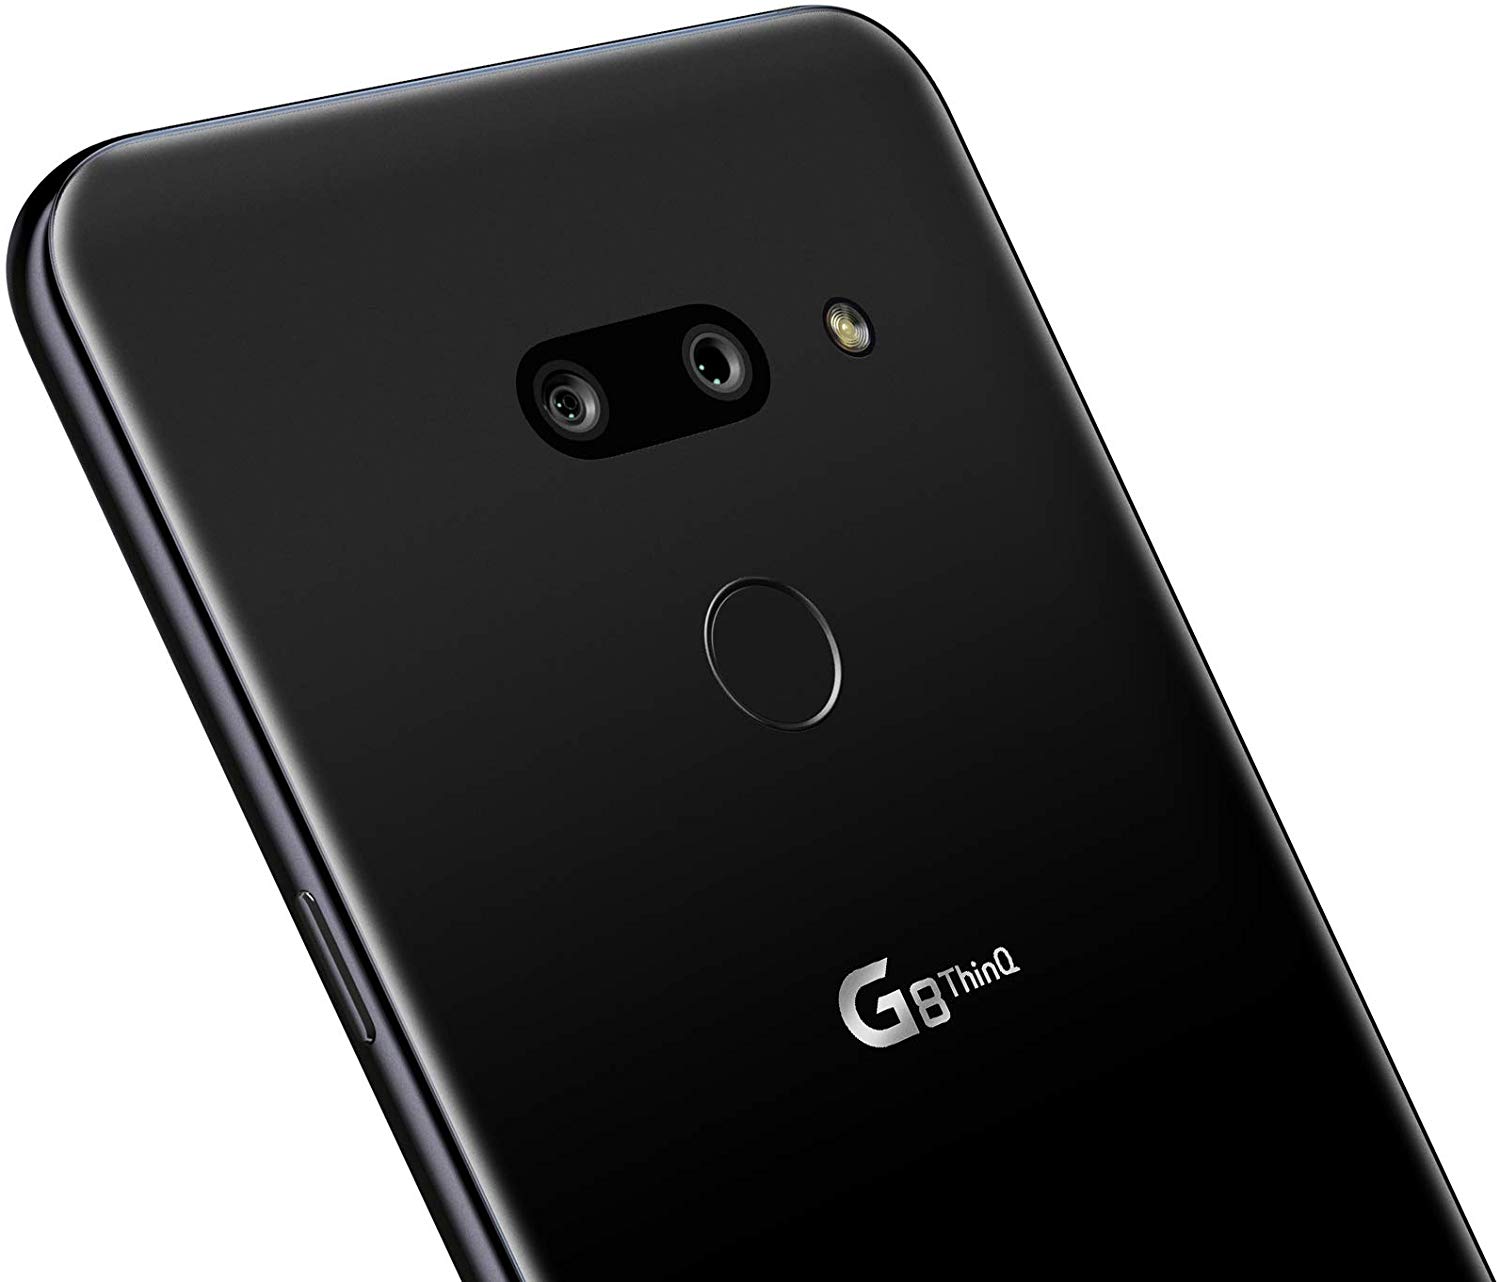 LG G8 started receiving stable Android 10 update